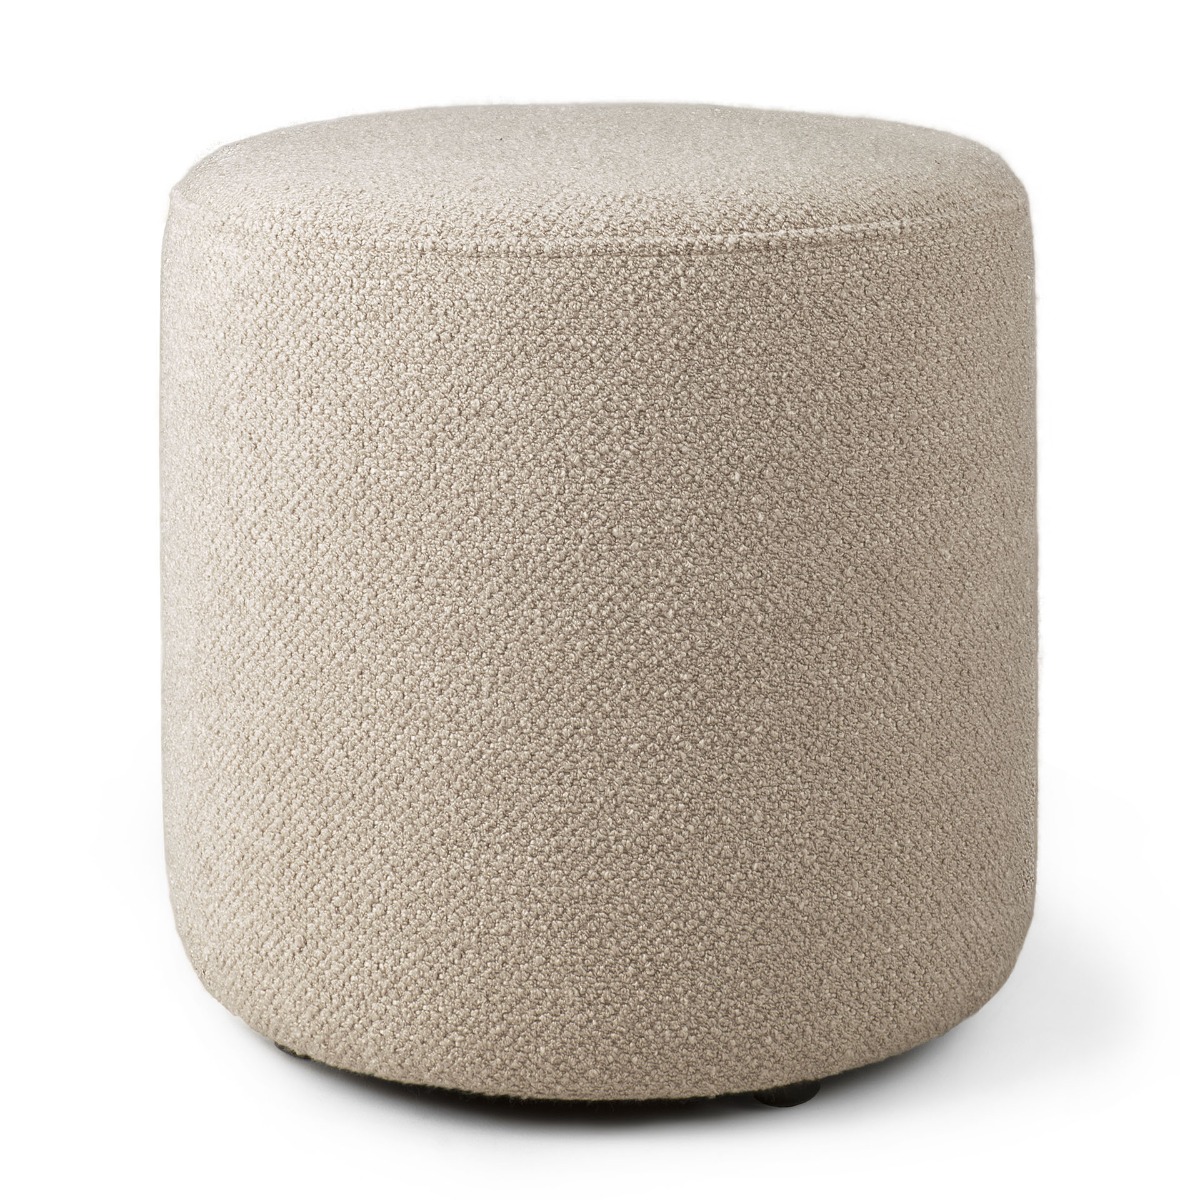 Barrow footstool in Off White